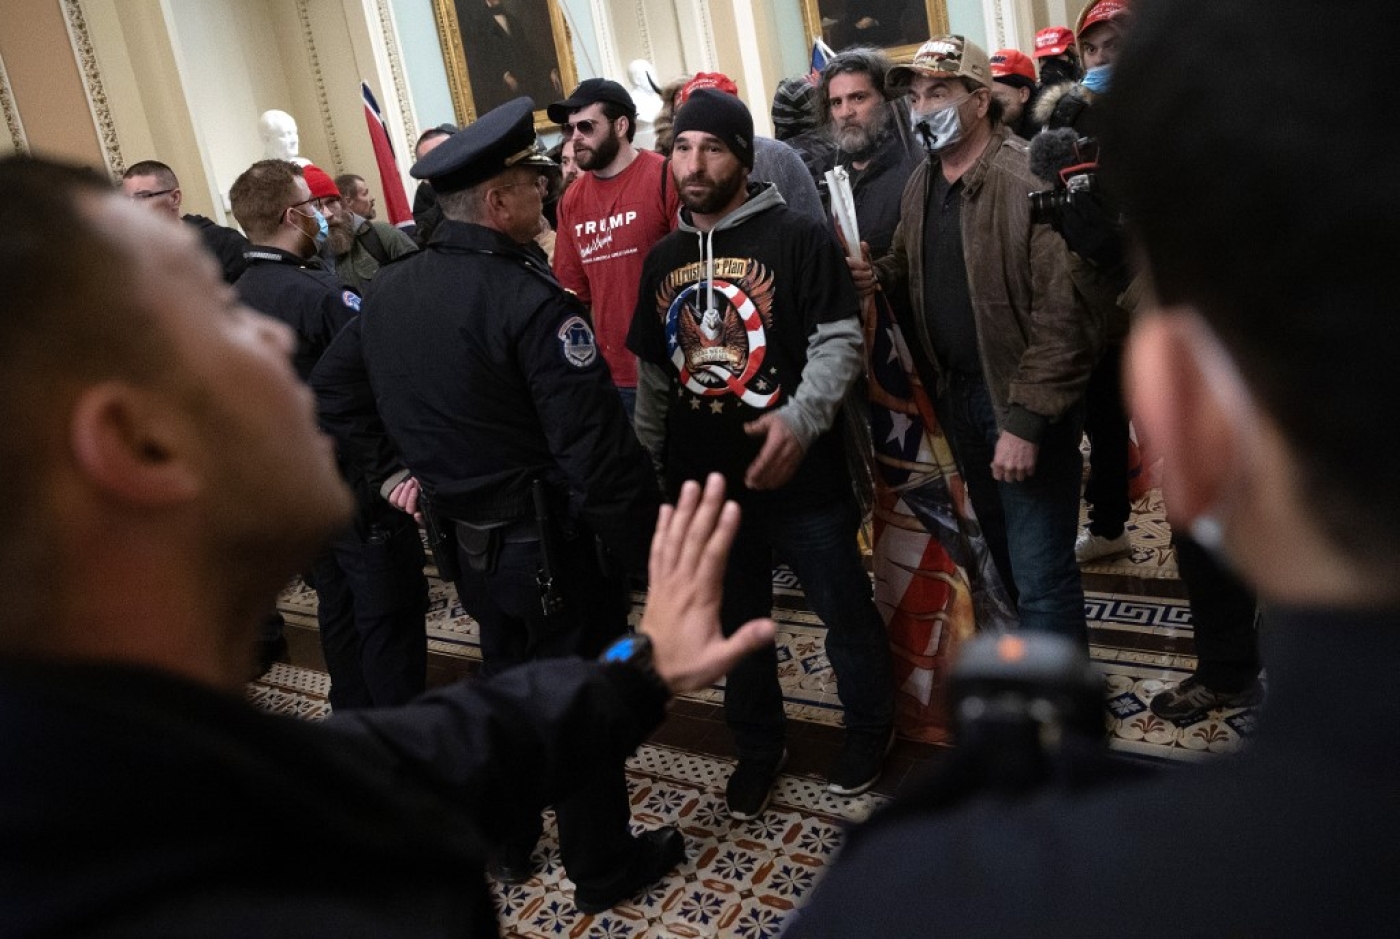 Trump-supporting mob confronts US Capitol police after storming the building on 6 January 